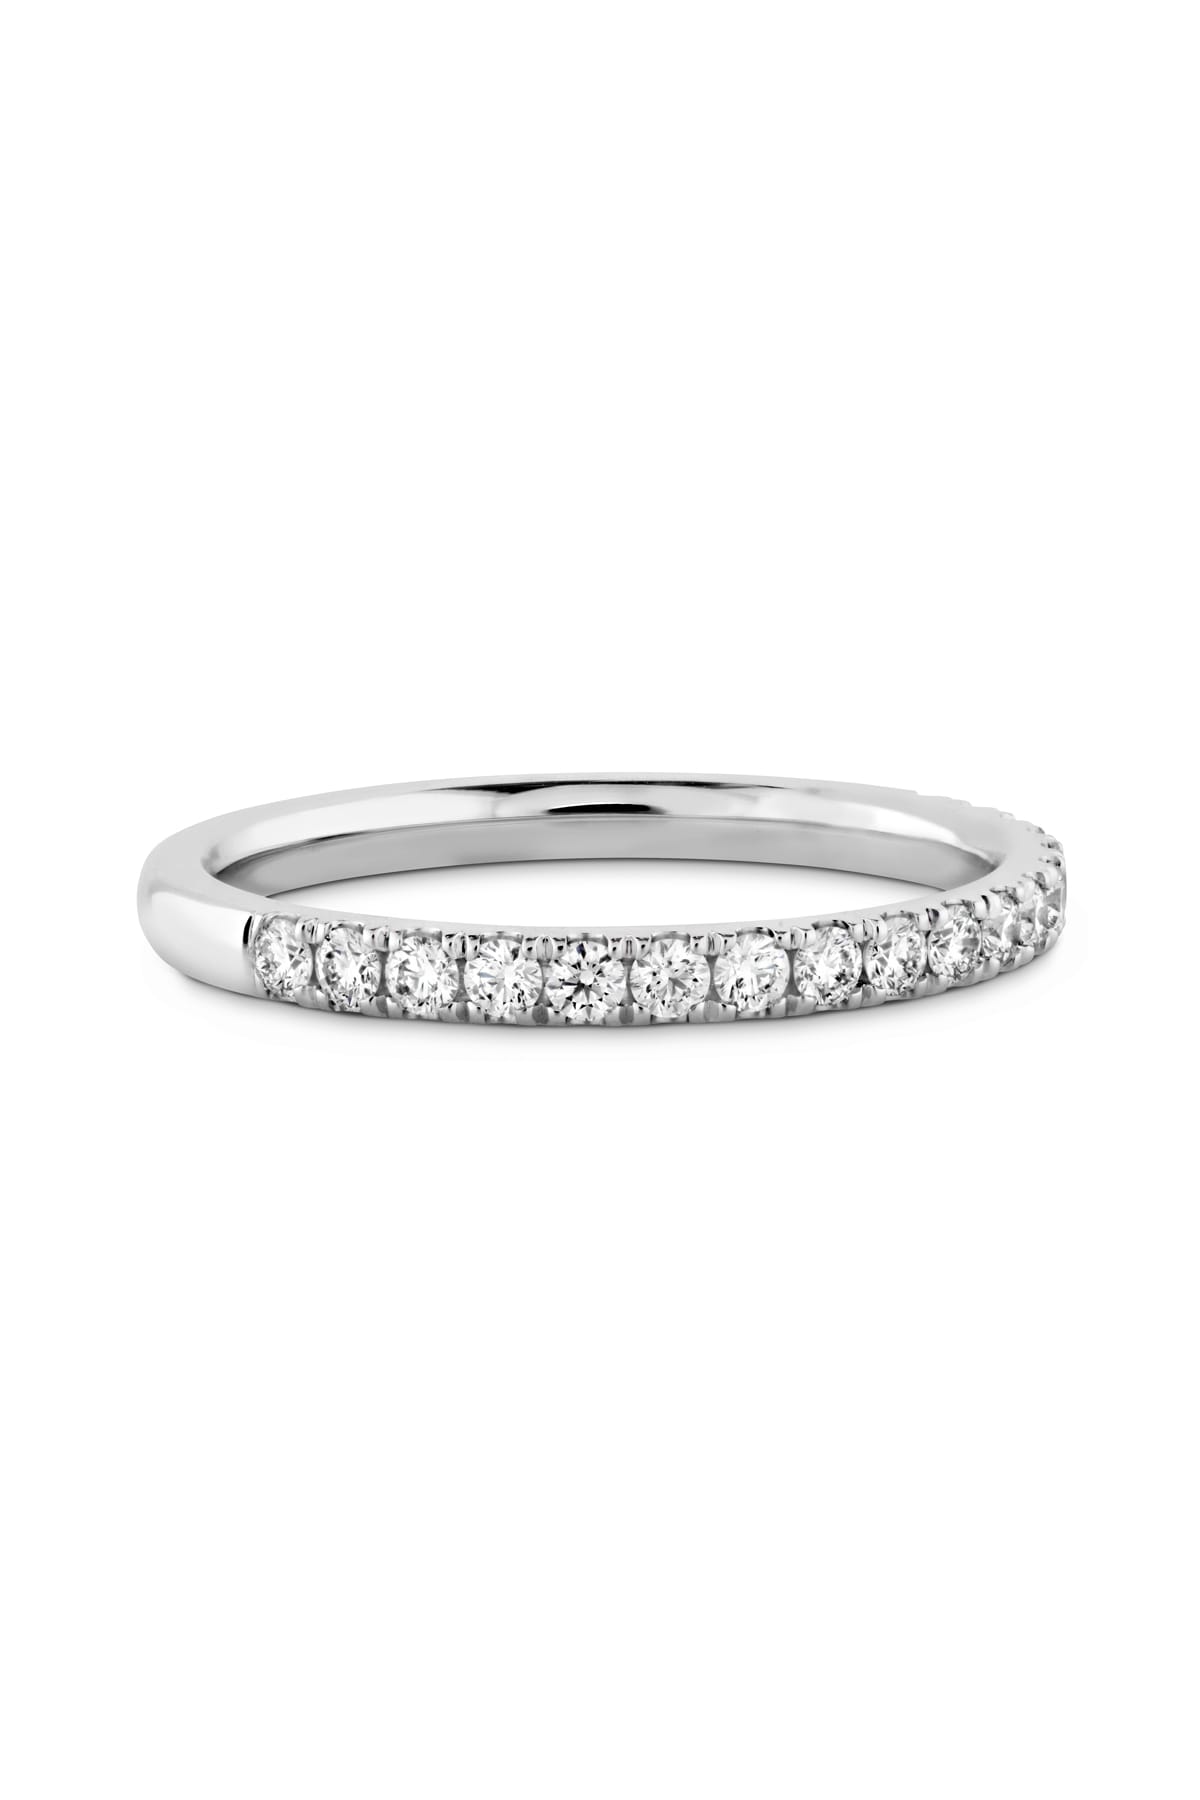 Juliette Diamond Band From Hearts On Fire available at LeGassick Diamonds and Jewellery Gold Coast, Australia.